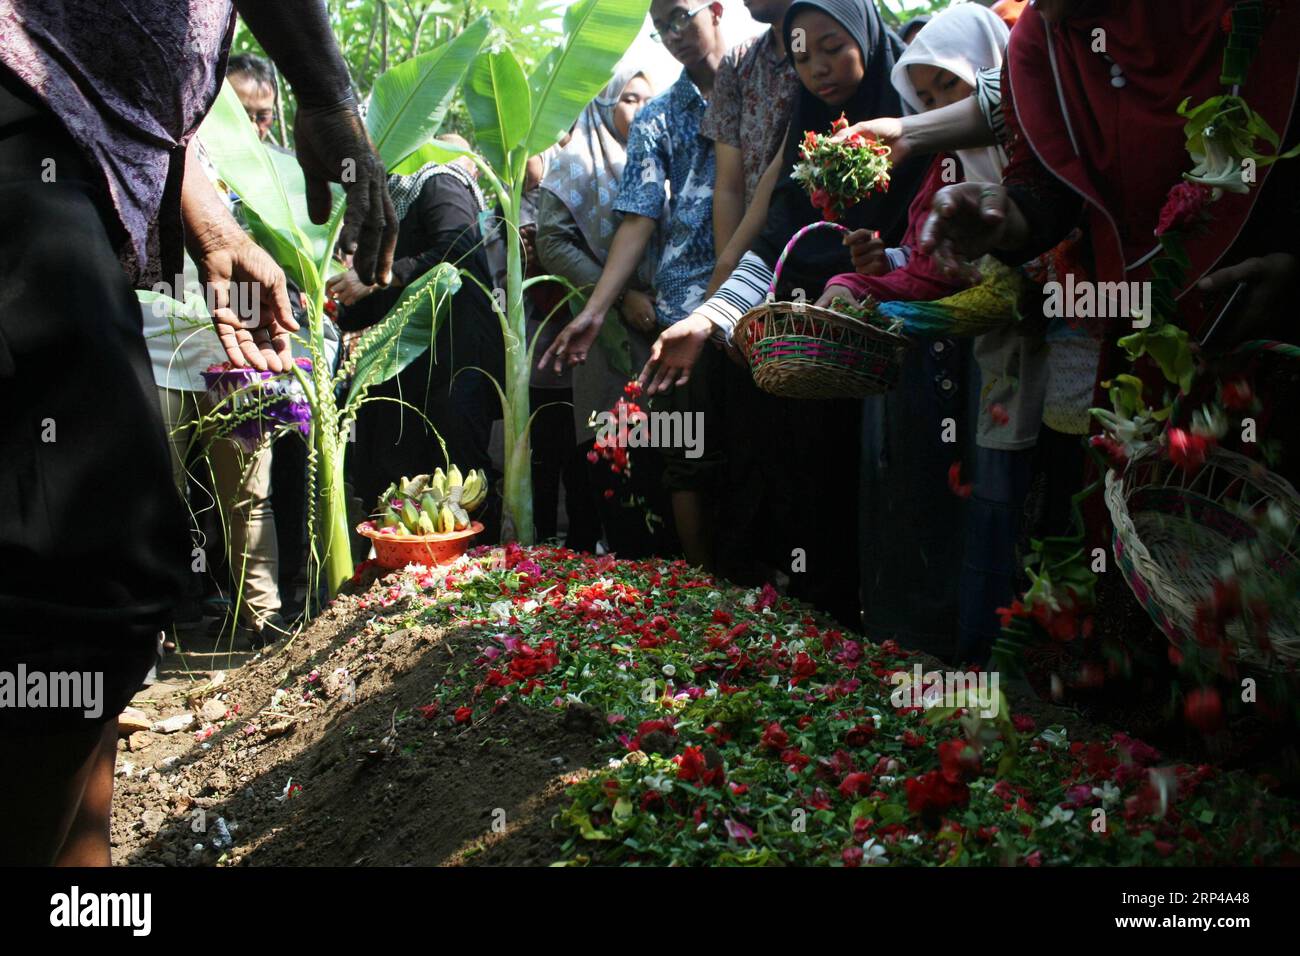 (181101) -- JAKARTA, Nov. 1, 2018 -- Relatives put flowers to the grave of Jannatun Cintya Dewi, a passanger who died in the crash of Lion Air JT 610, during a funeral in Sidoarjo, East Java, Indonesia, Tuesday, Nov. 1, 2018. ) (lrz) INDONESIA-LION AIR-JT 610-CRASH-AFTERMATH Kurniawan PUBLICATIONxNOTxINxCHN Stock Photo